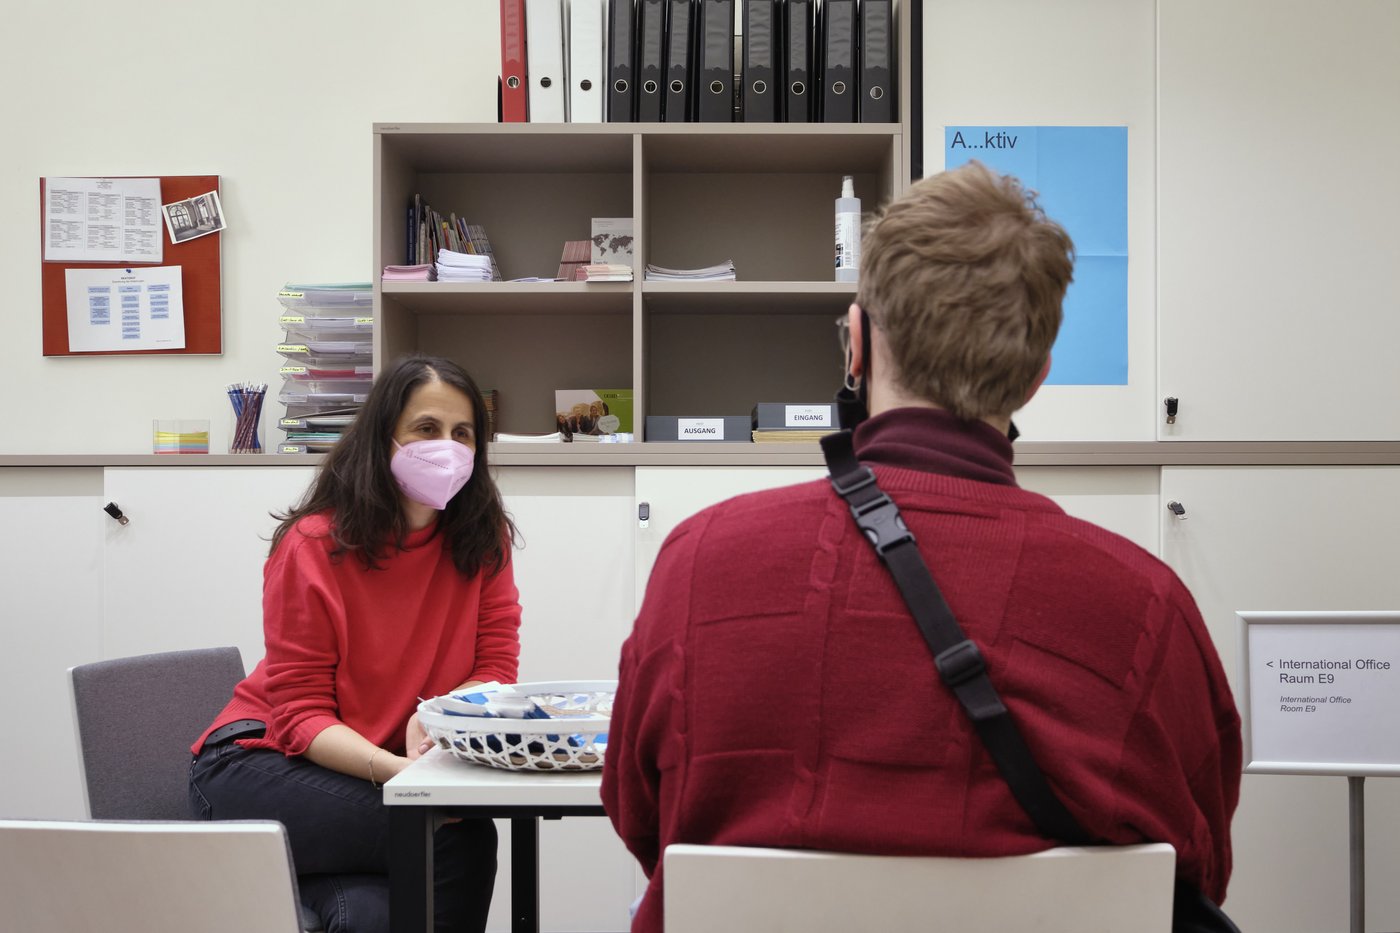 A woman and a student are sitting at a table, both have red sweaters and masks on. In the background you can see typical office equipment.